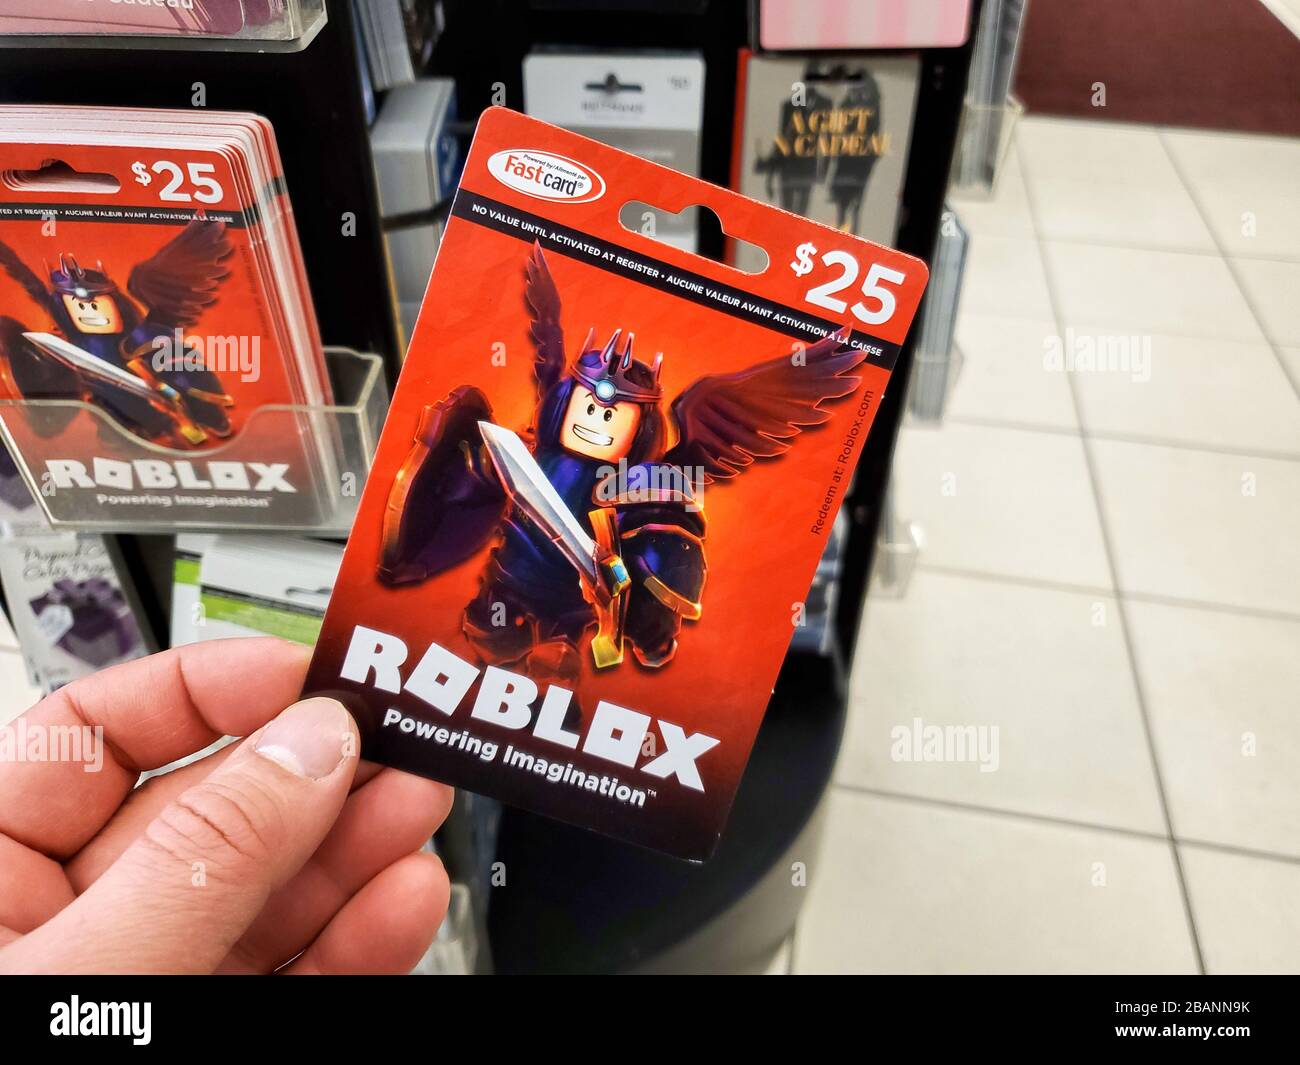 Montreal Canada March 22 2020 Roblox Gift Card In A Hand Over